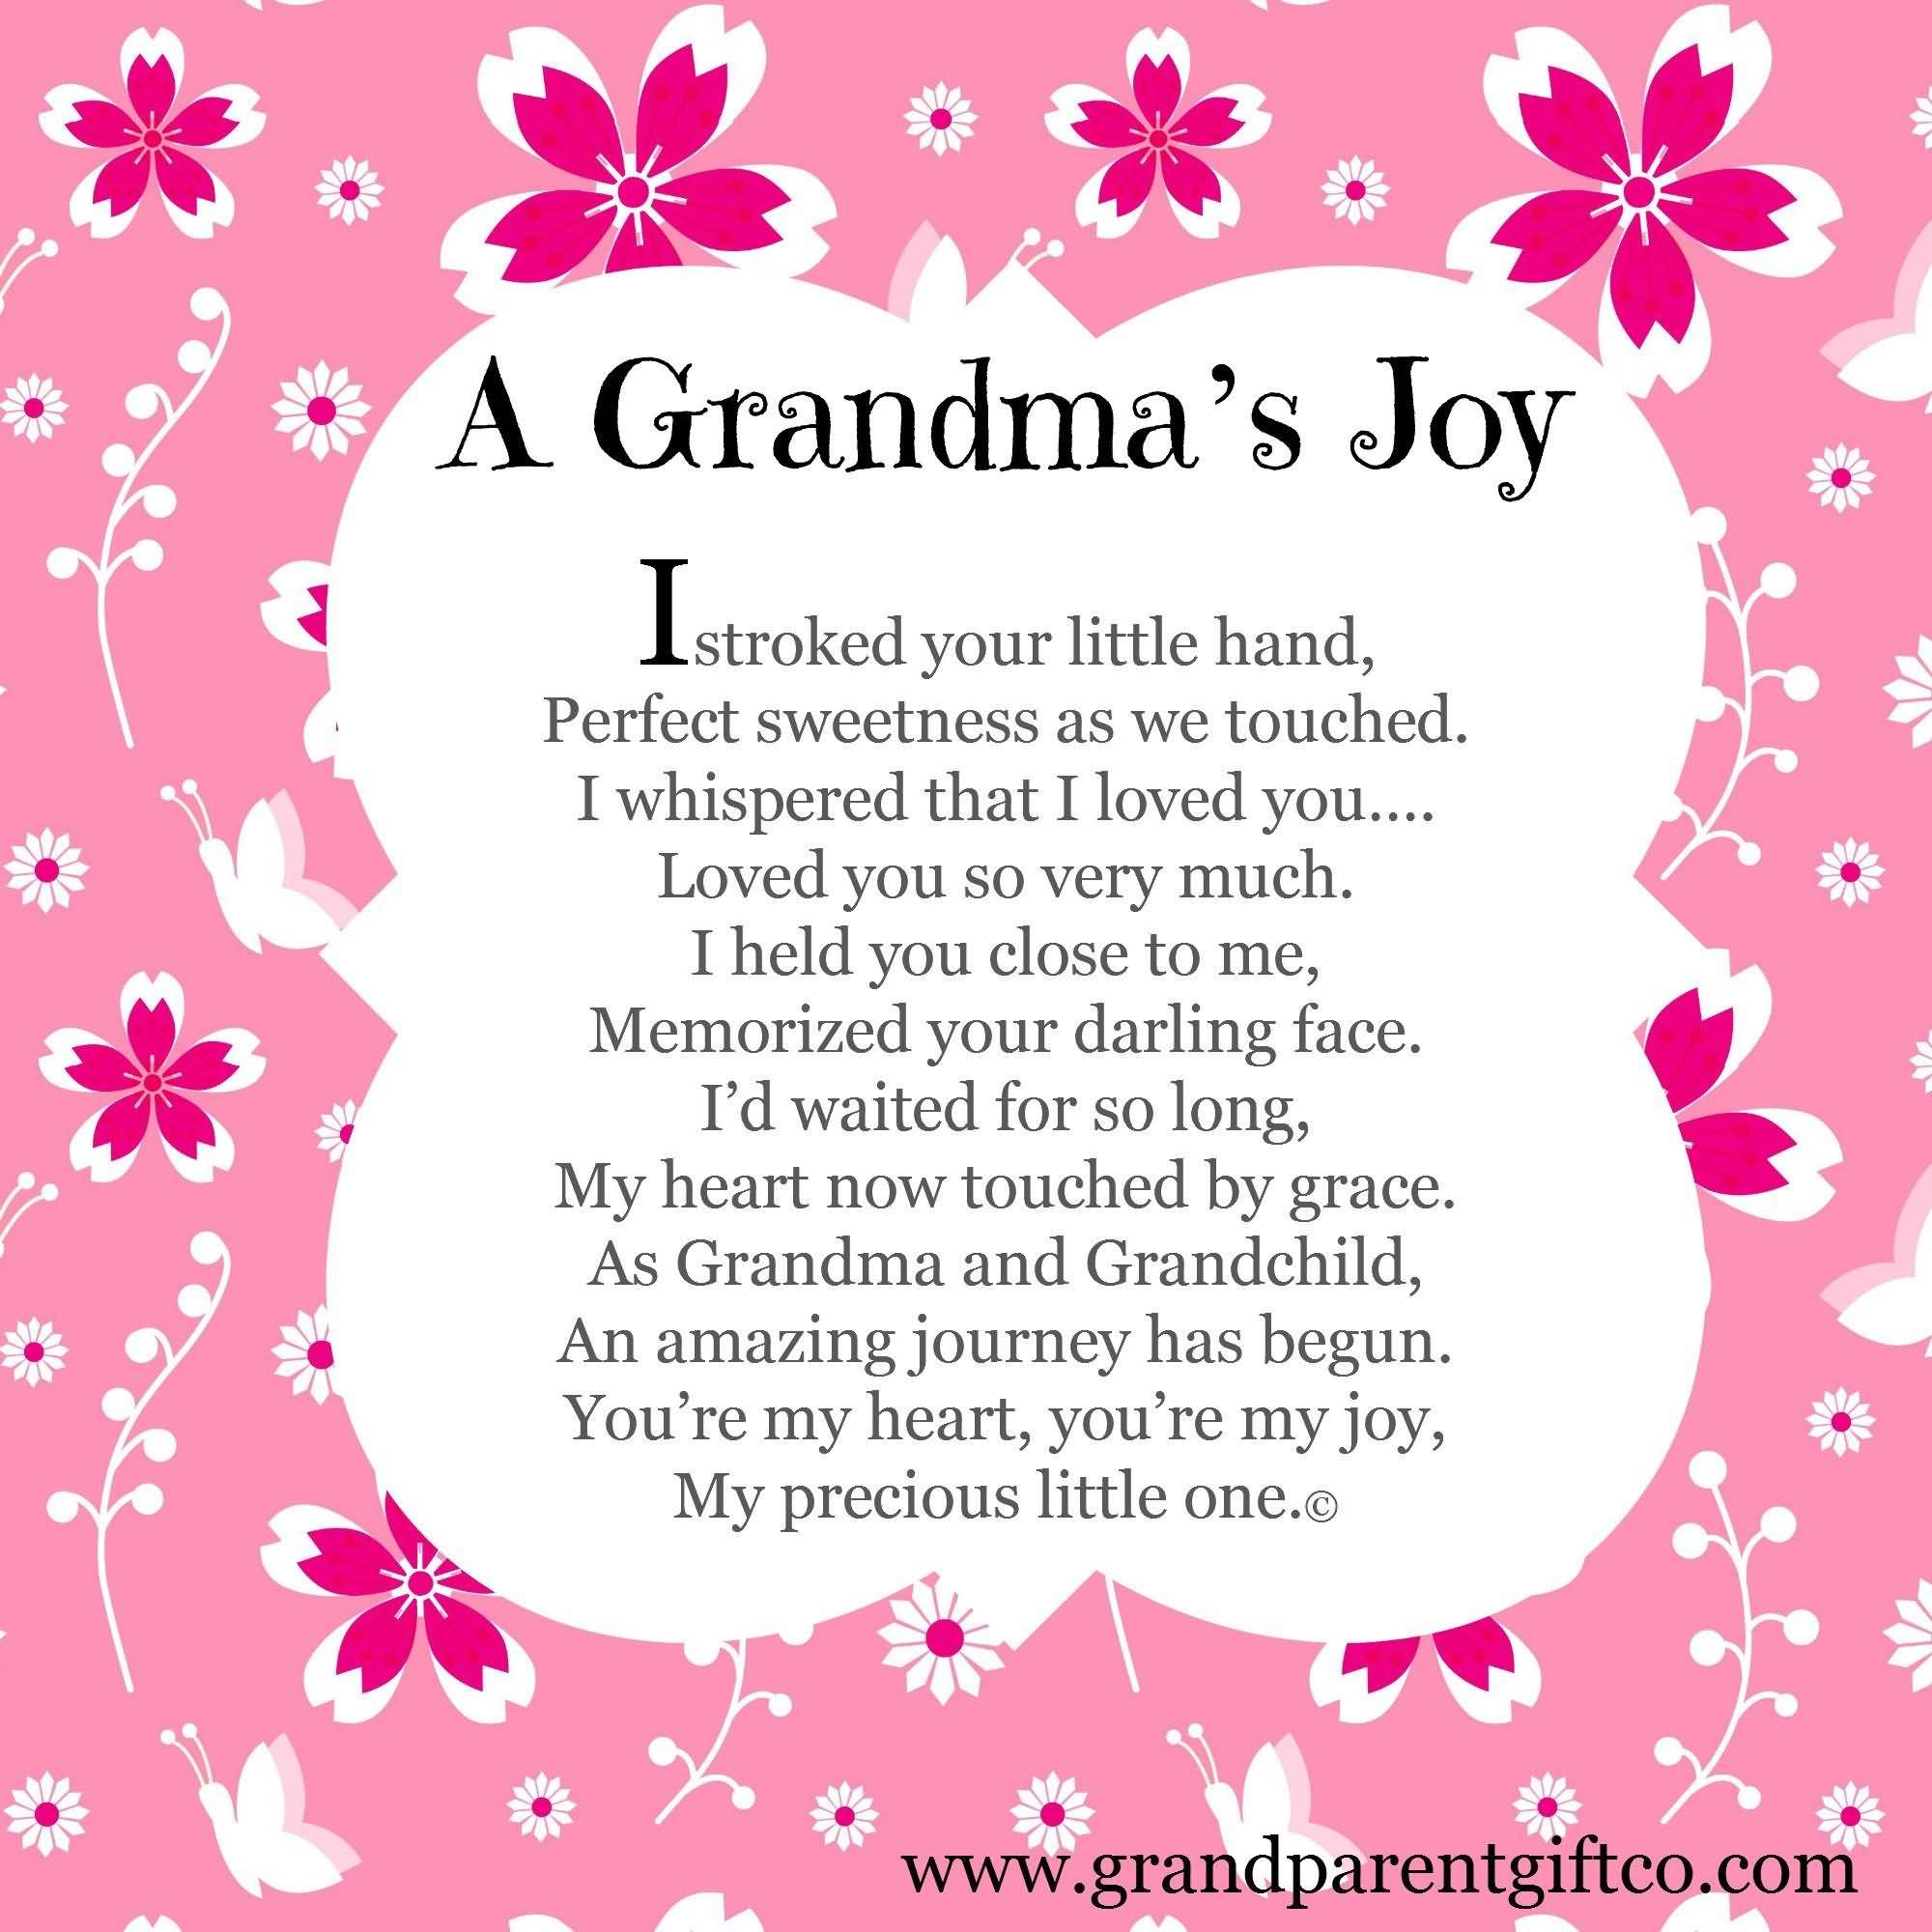 31 Trendy Granddaughter Quotes From Grandparents - Picss Mine